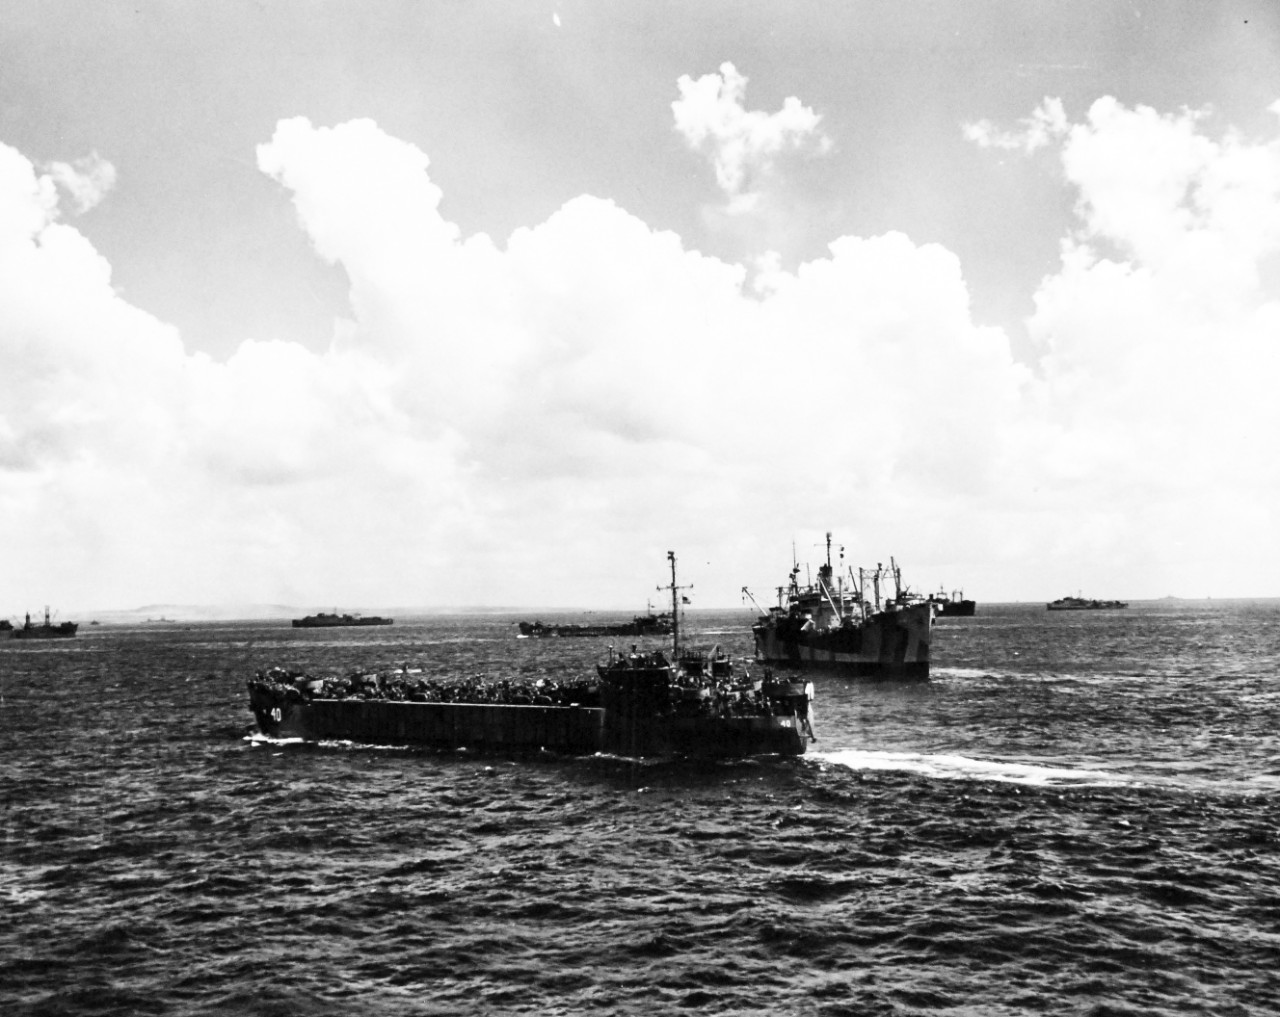 80-G-307729:  Invasion of Saipan, June-July 1944.  USS LST-40 in foreground and USS LST-483 in center.   Photograph received March 20, 1945.      Official U.S. Navy Photograph, now in the collections of the U.S. Navy.  (2017/04/11).  